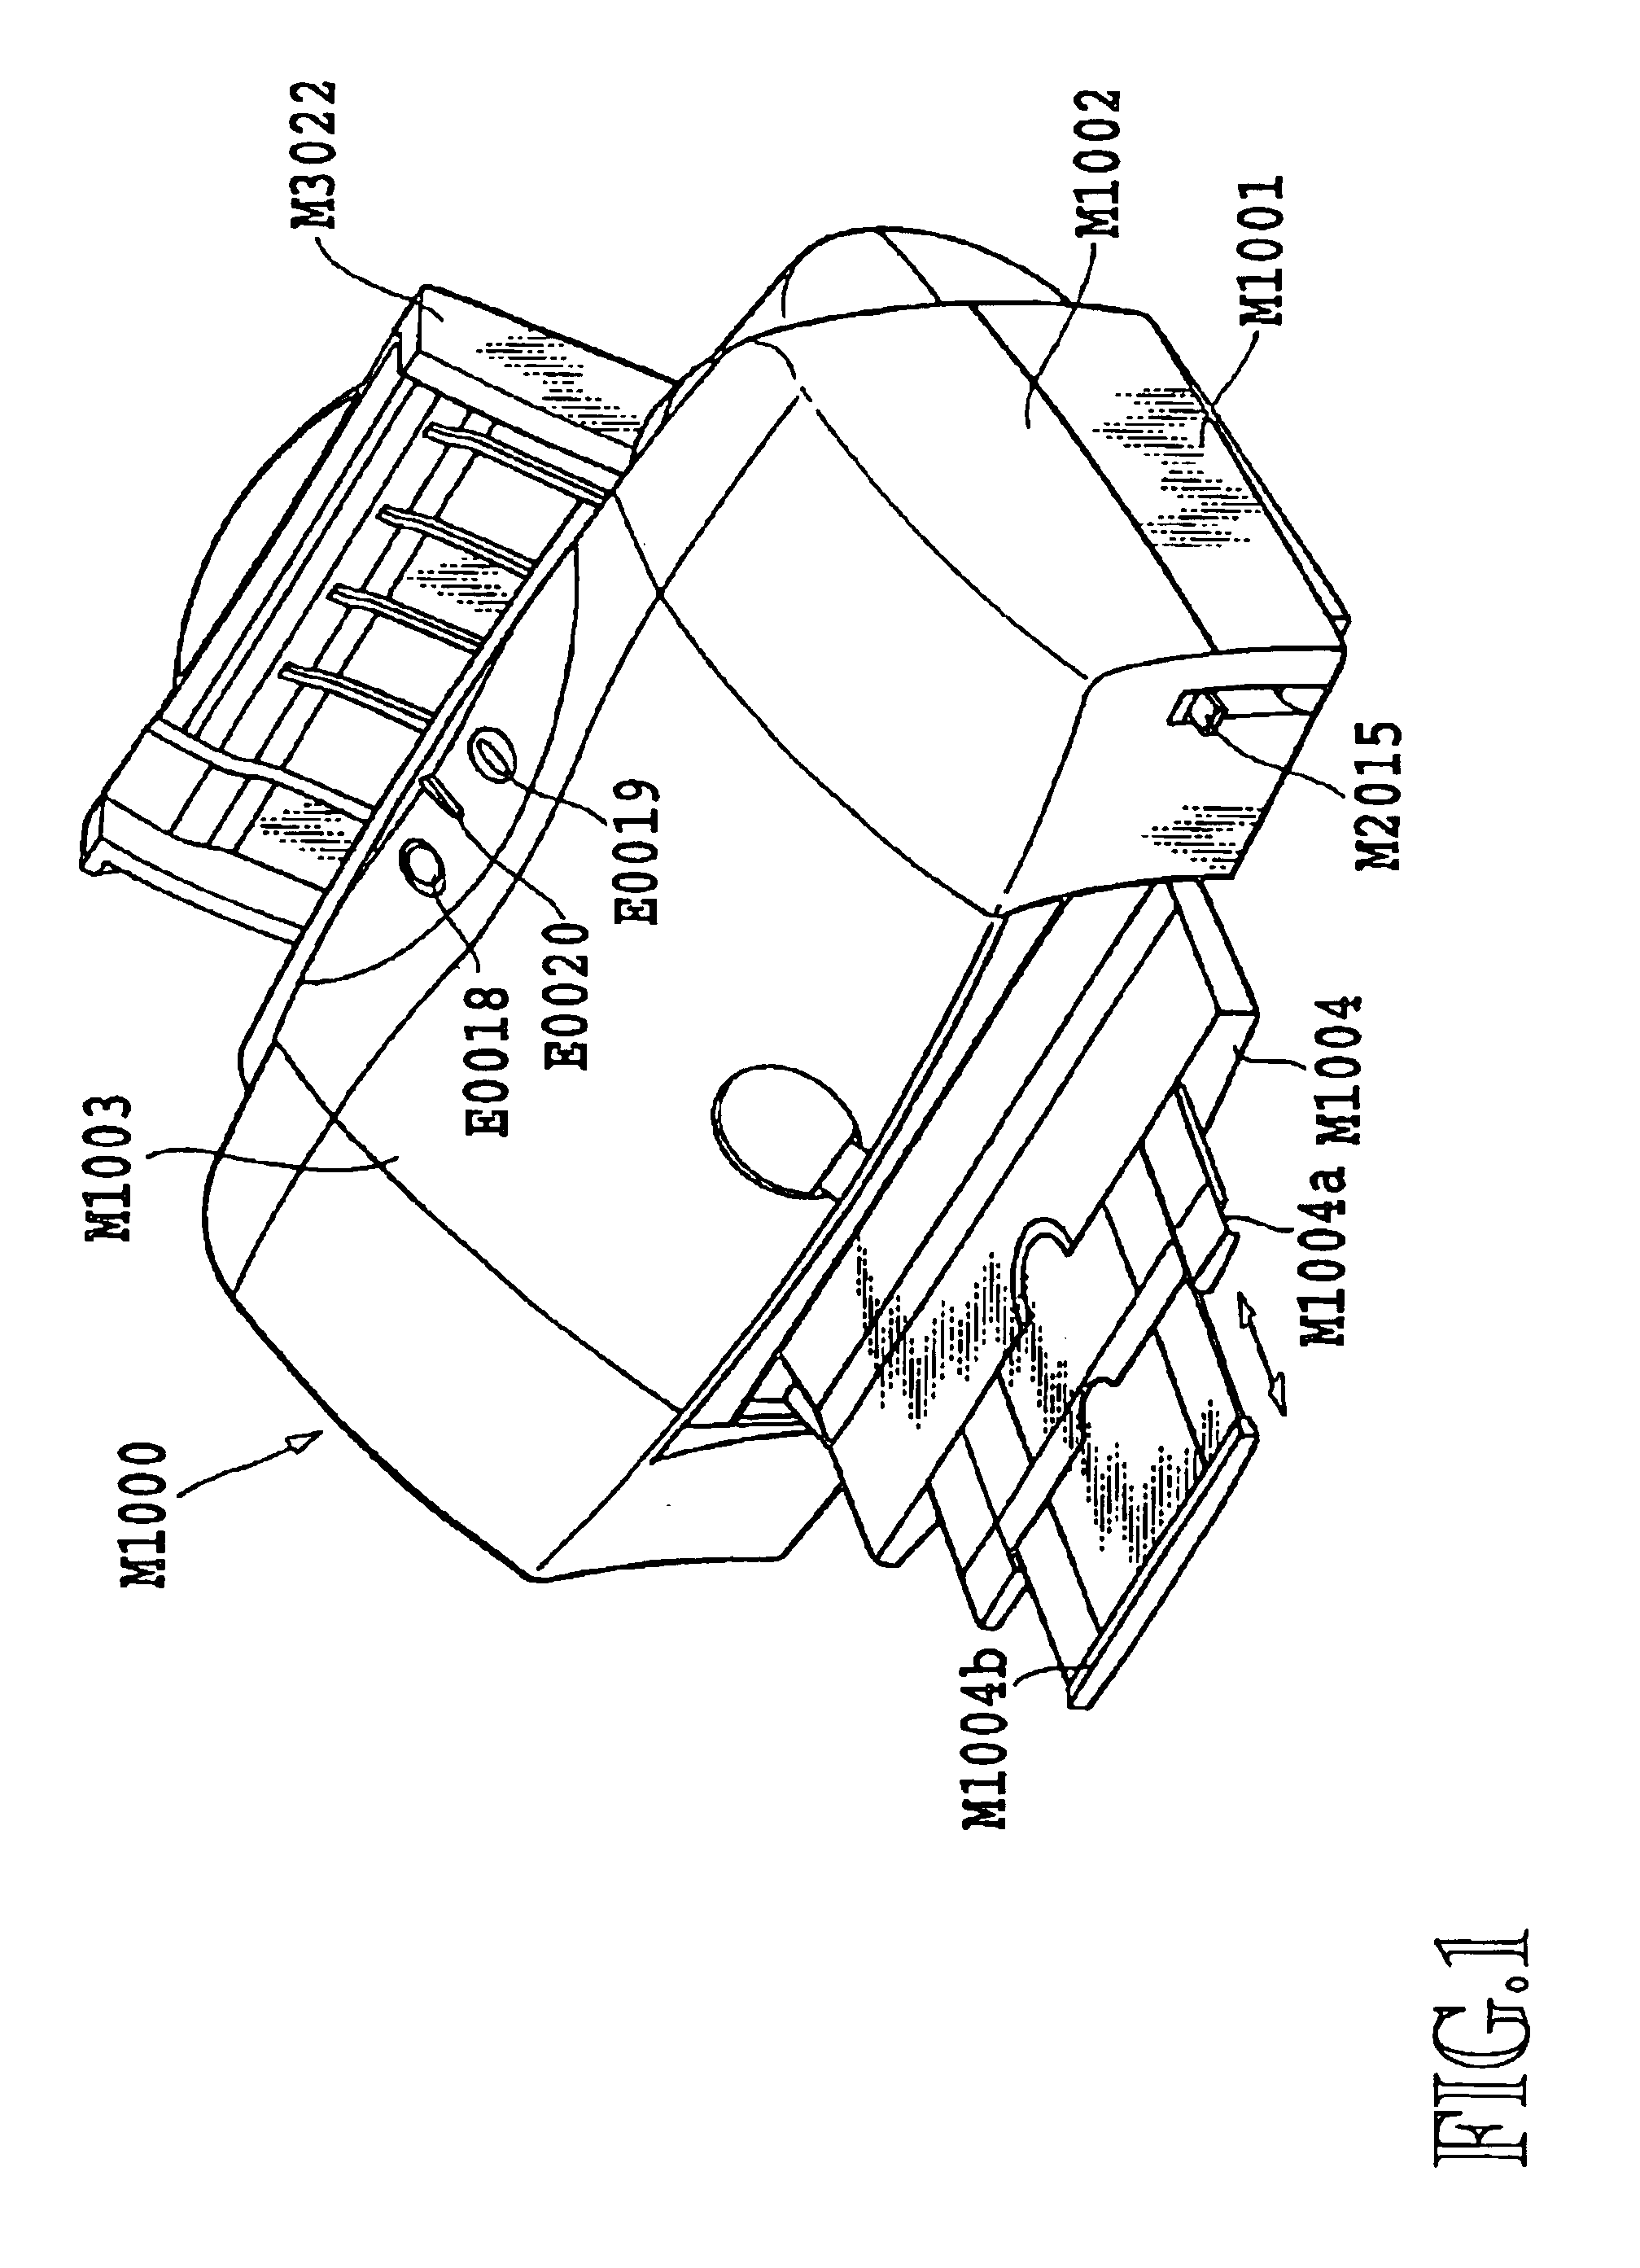 Ink jet printing apparatus and ink jet printing method for forming an image on a print medium